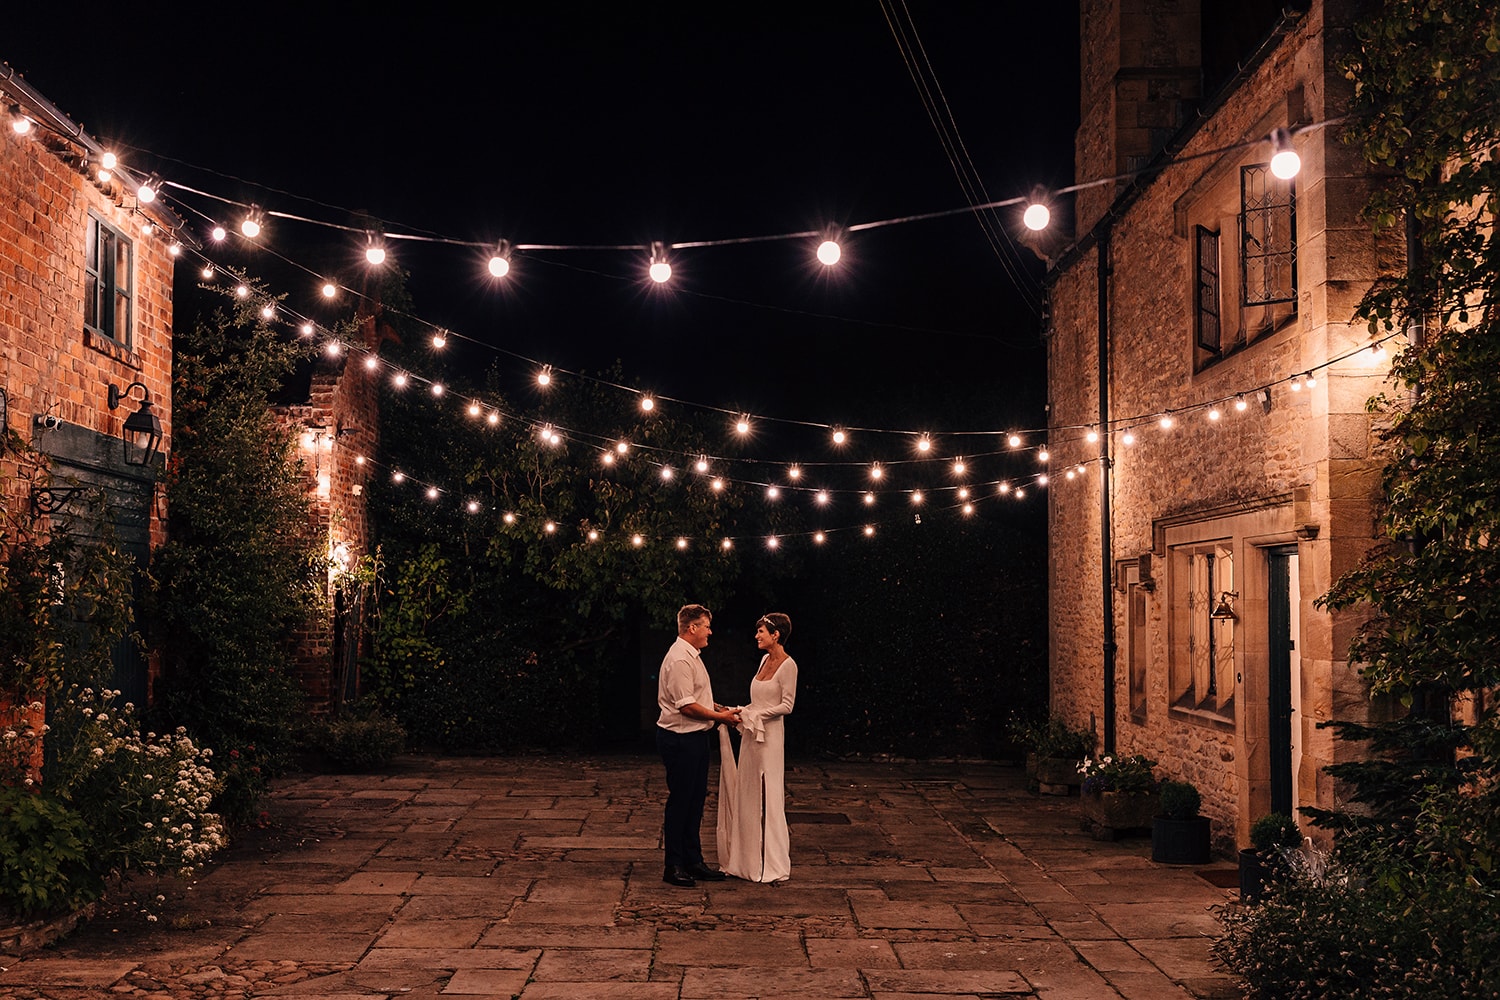 Evening photograph of the Bride and Groom under strings of festoon lights